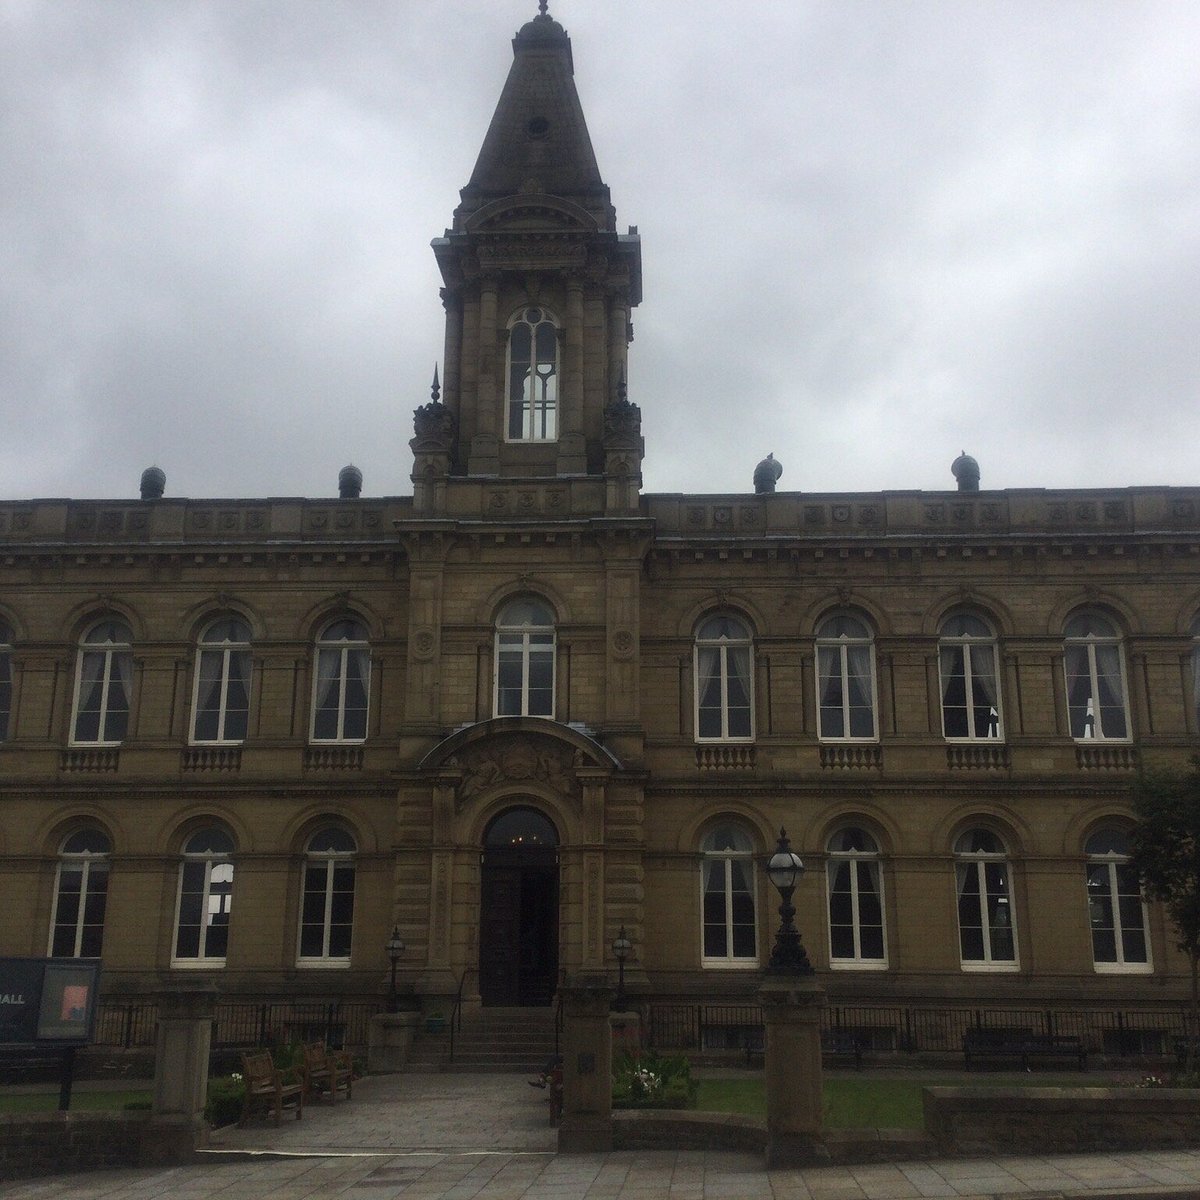 Saltaire, World Heritage Site